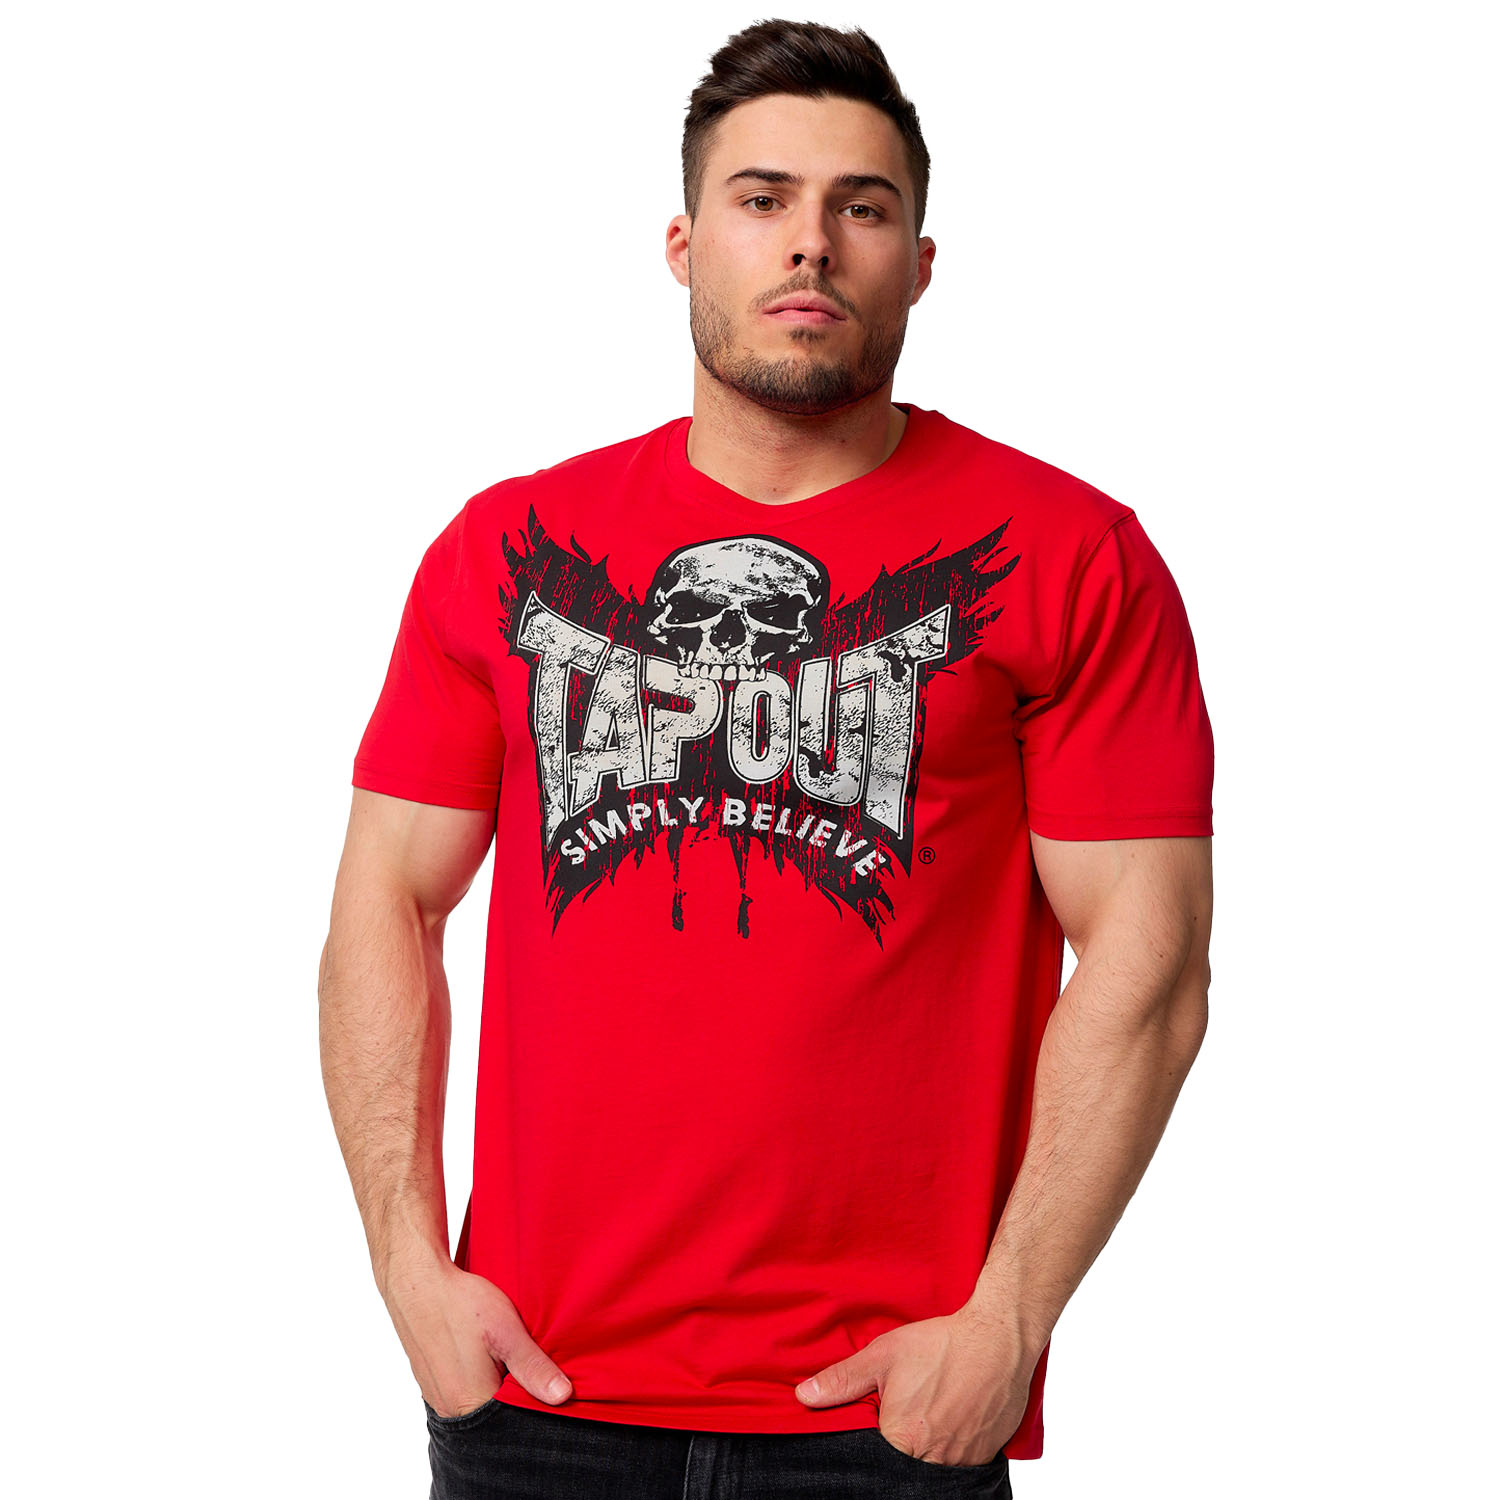 Tapout T-Shirt, Creston, red